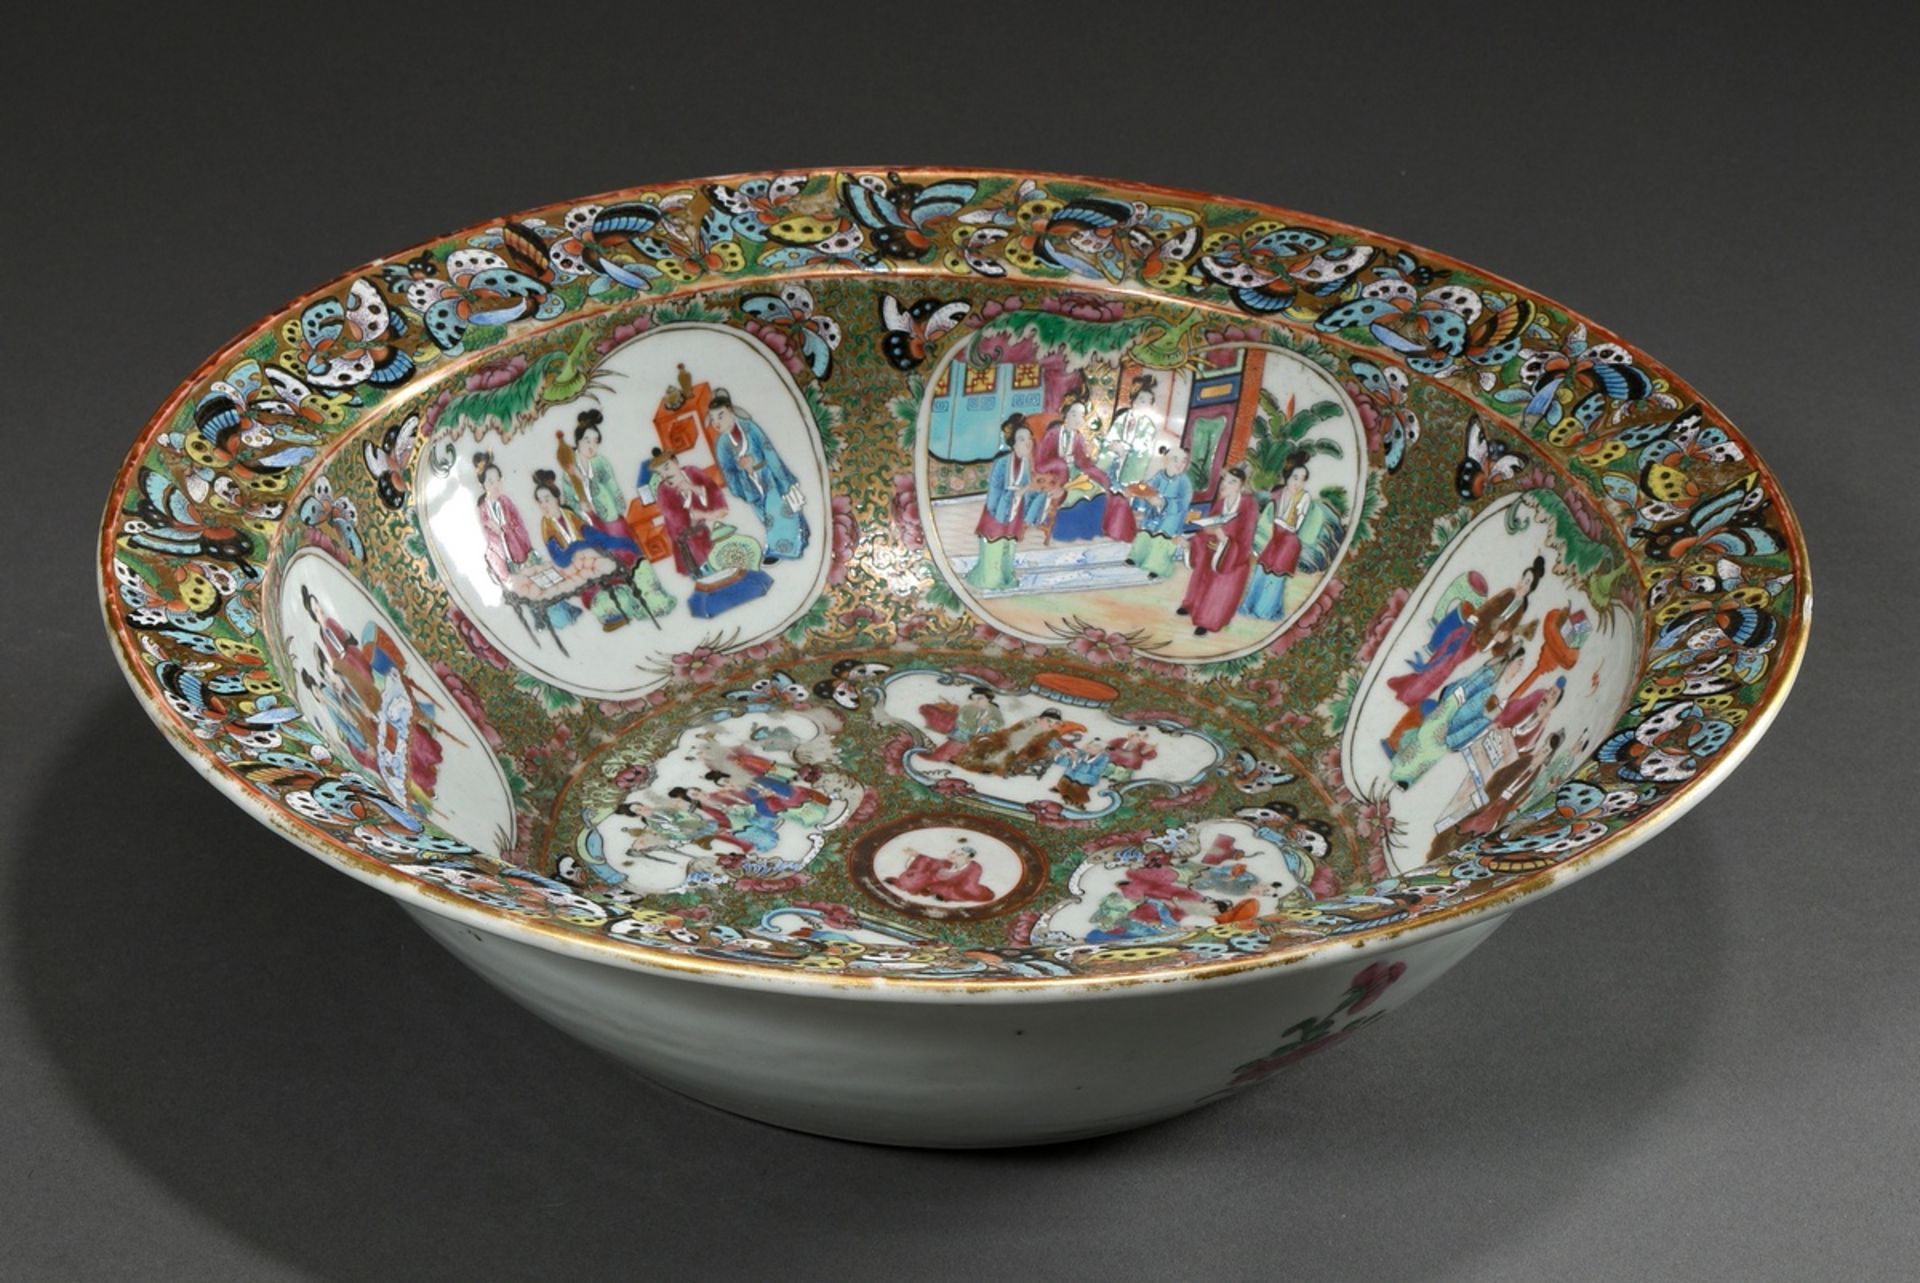 A very large Canton porcelain bowl with polychrome, partly opaque Famille Rose enamel painting, in 